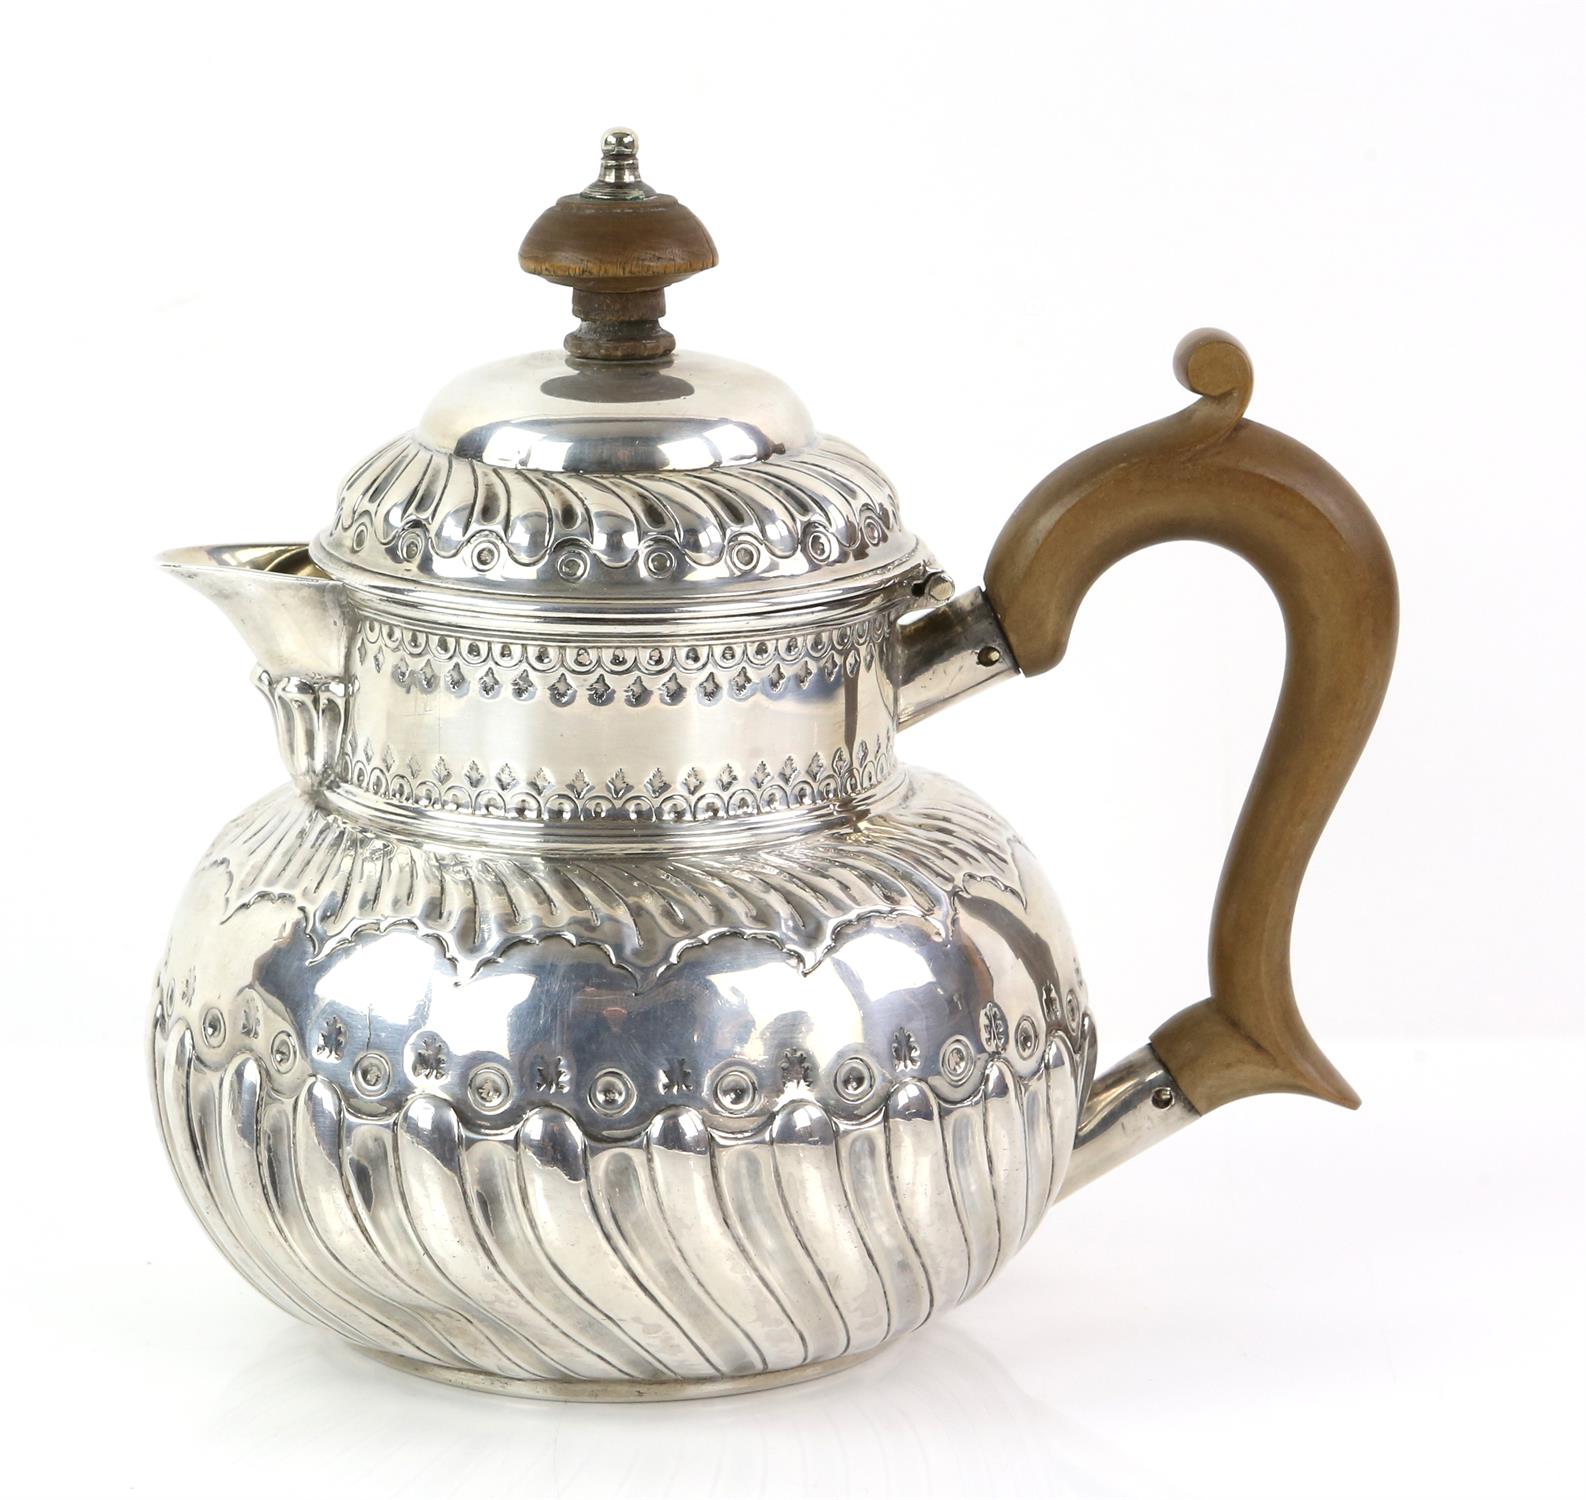 George III silver teapot with embossed and gadrooned decoration, gross weight 12oz, 373g,